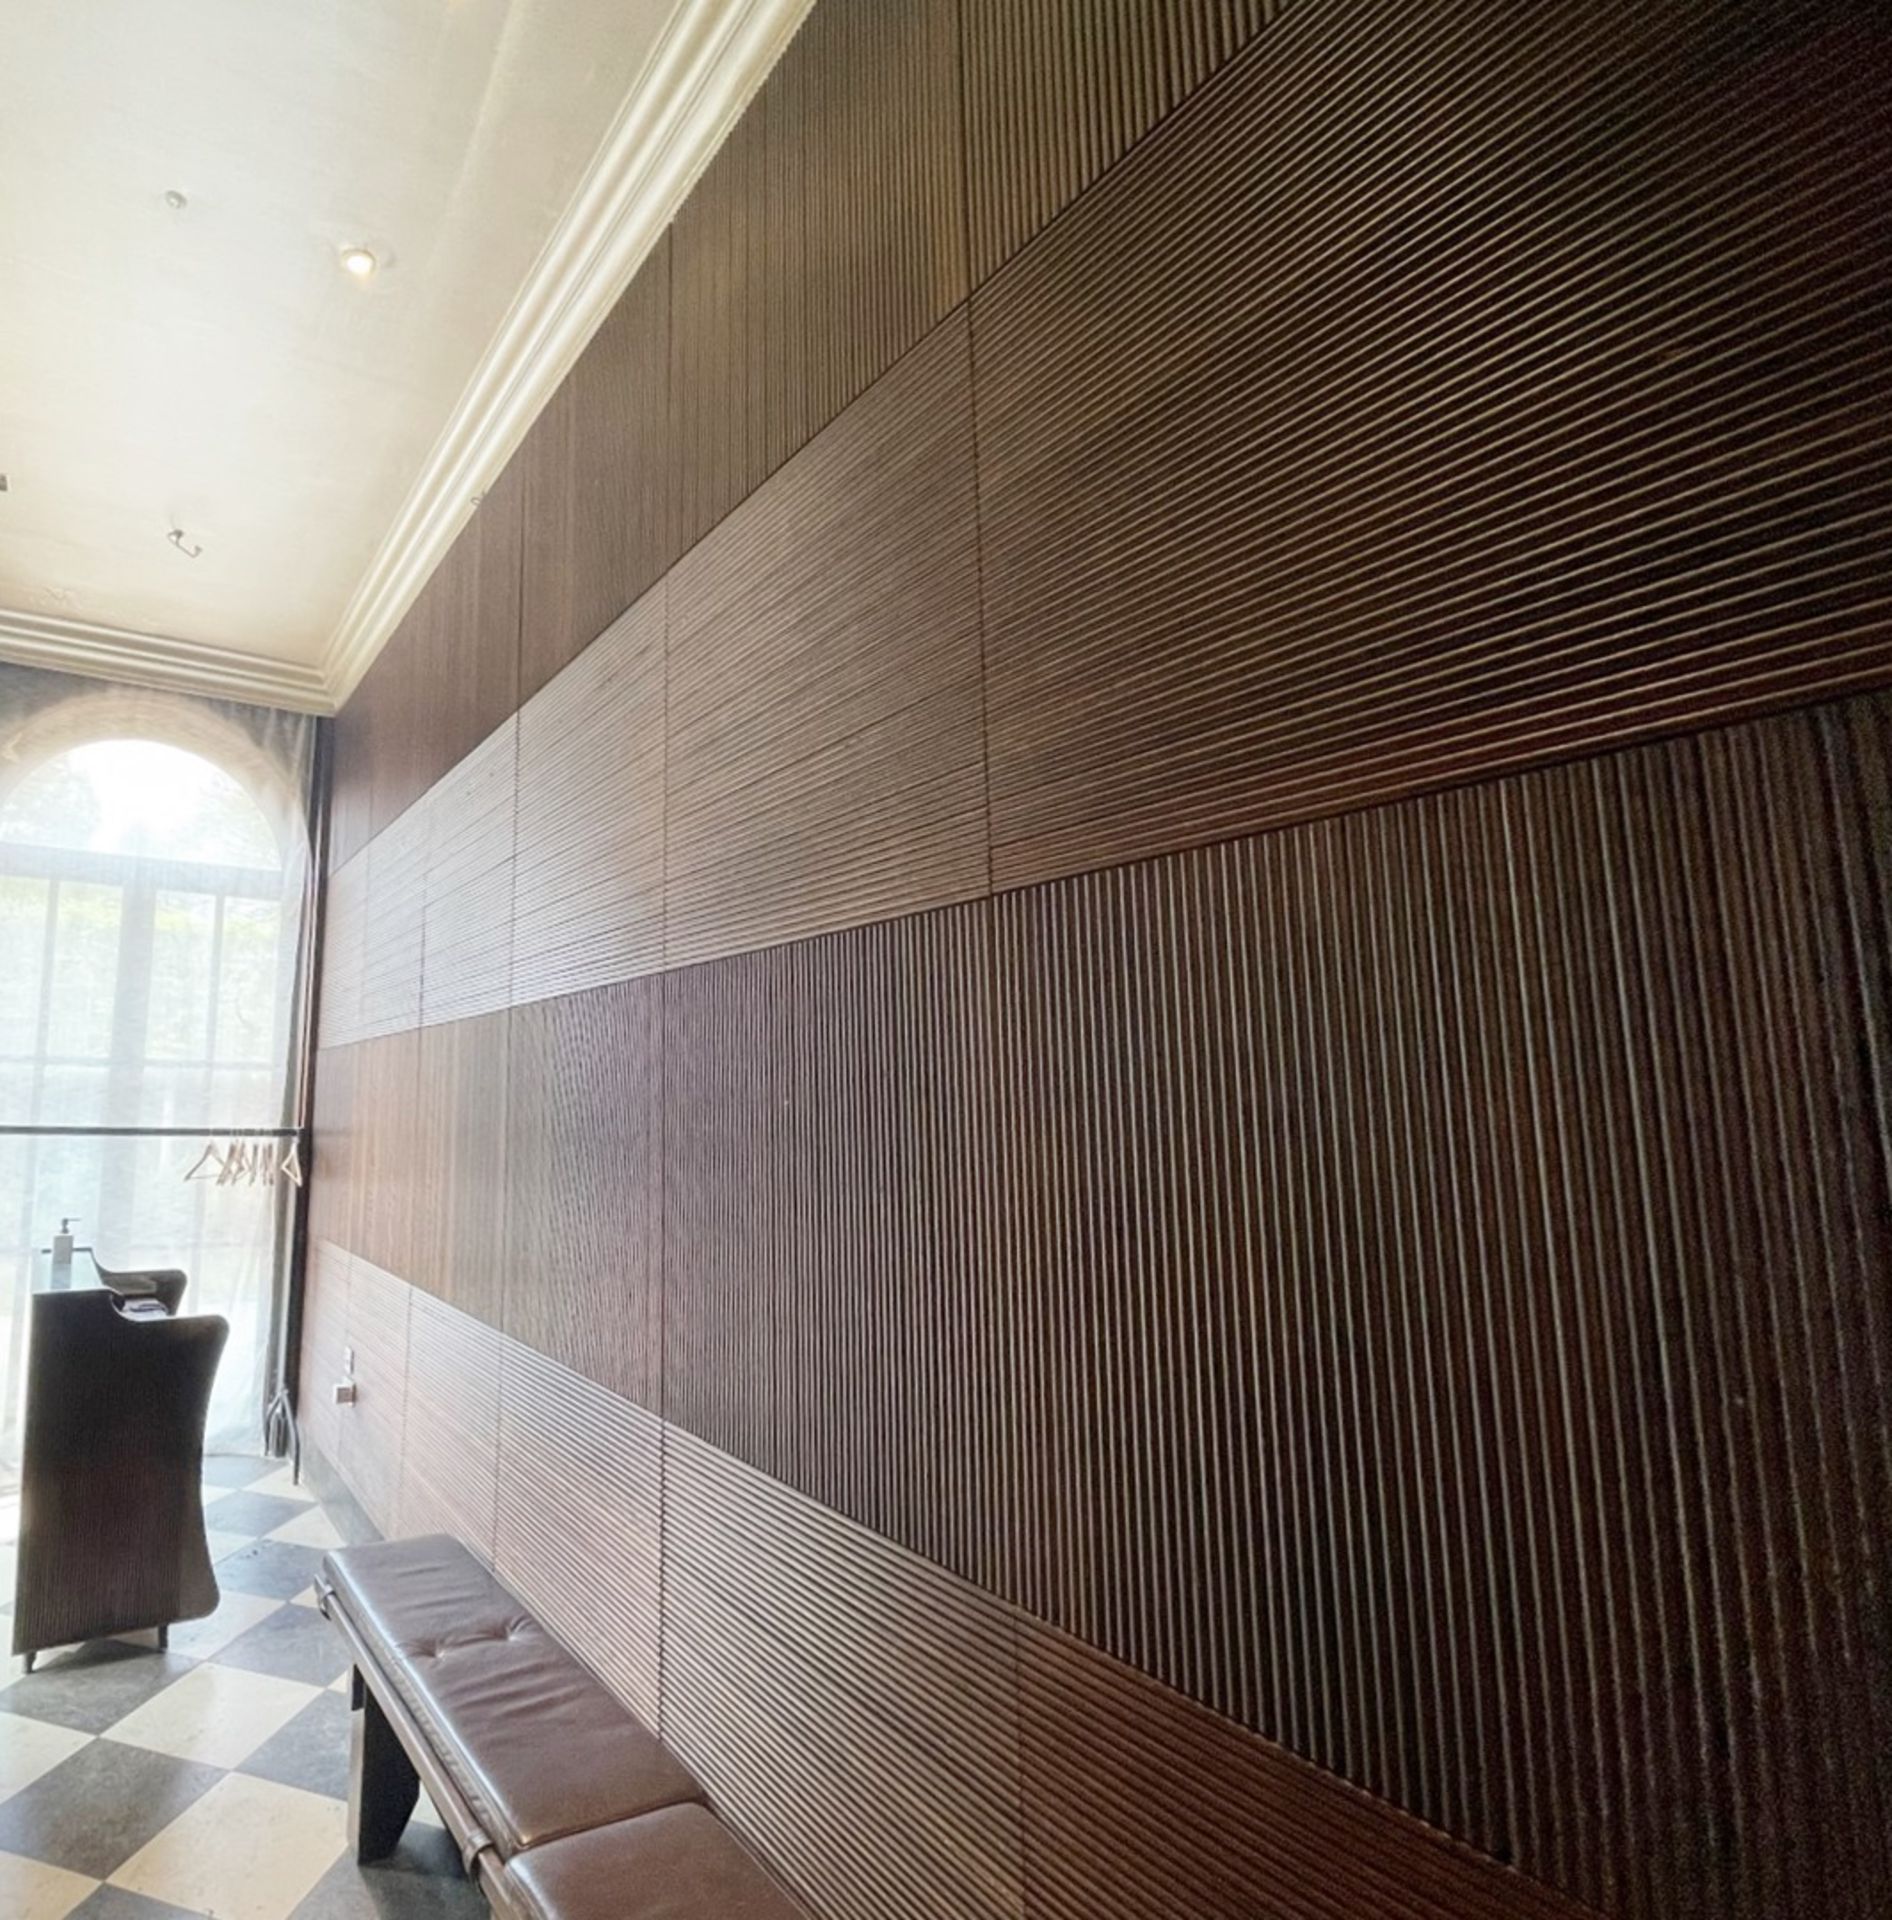 30 x Wooden Decorative Wall Panels - Sizes Vary - Ref: BLVD118 - CL649 - Location: London W8 Lot